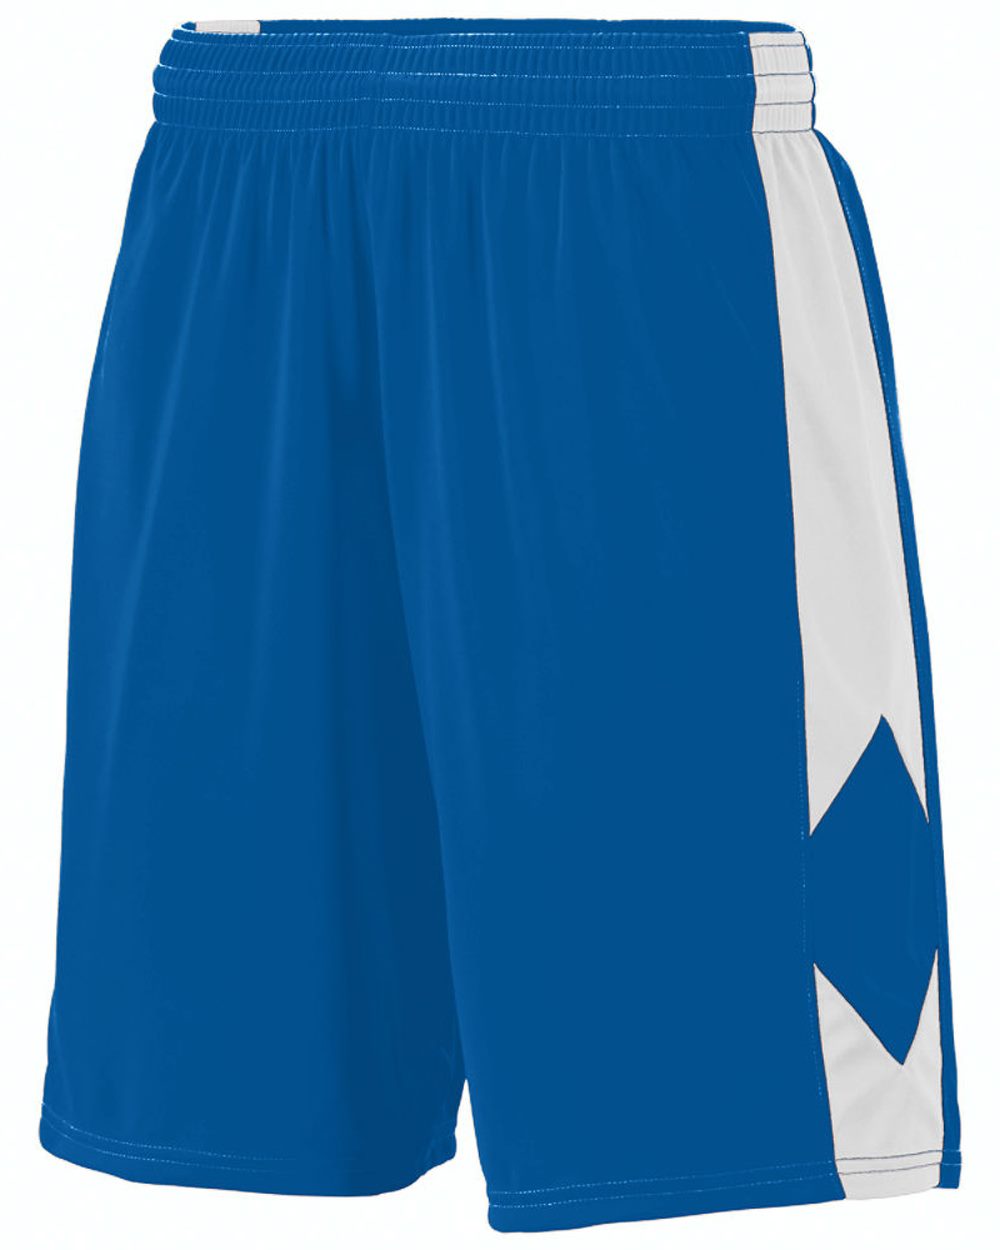 Augusta Sportswear 1716 - Youth Block Out Shorts